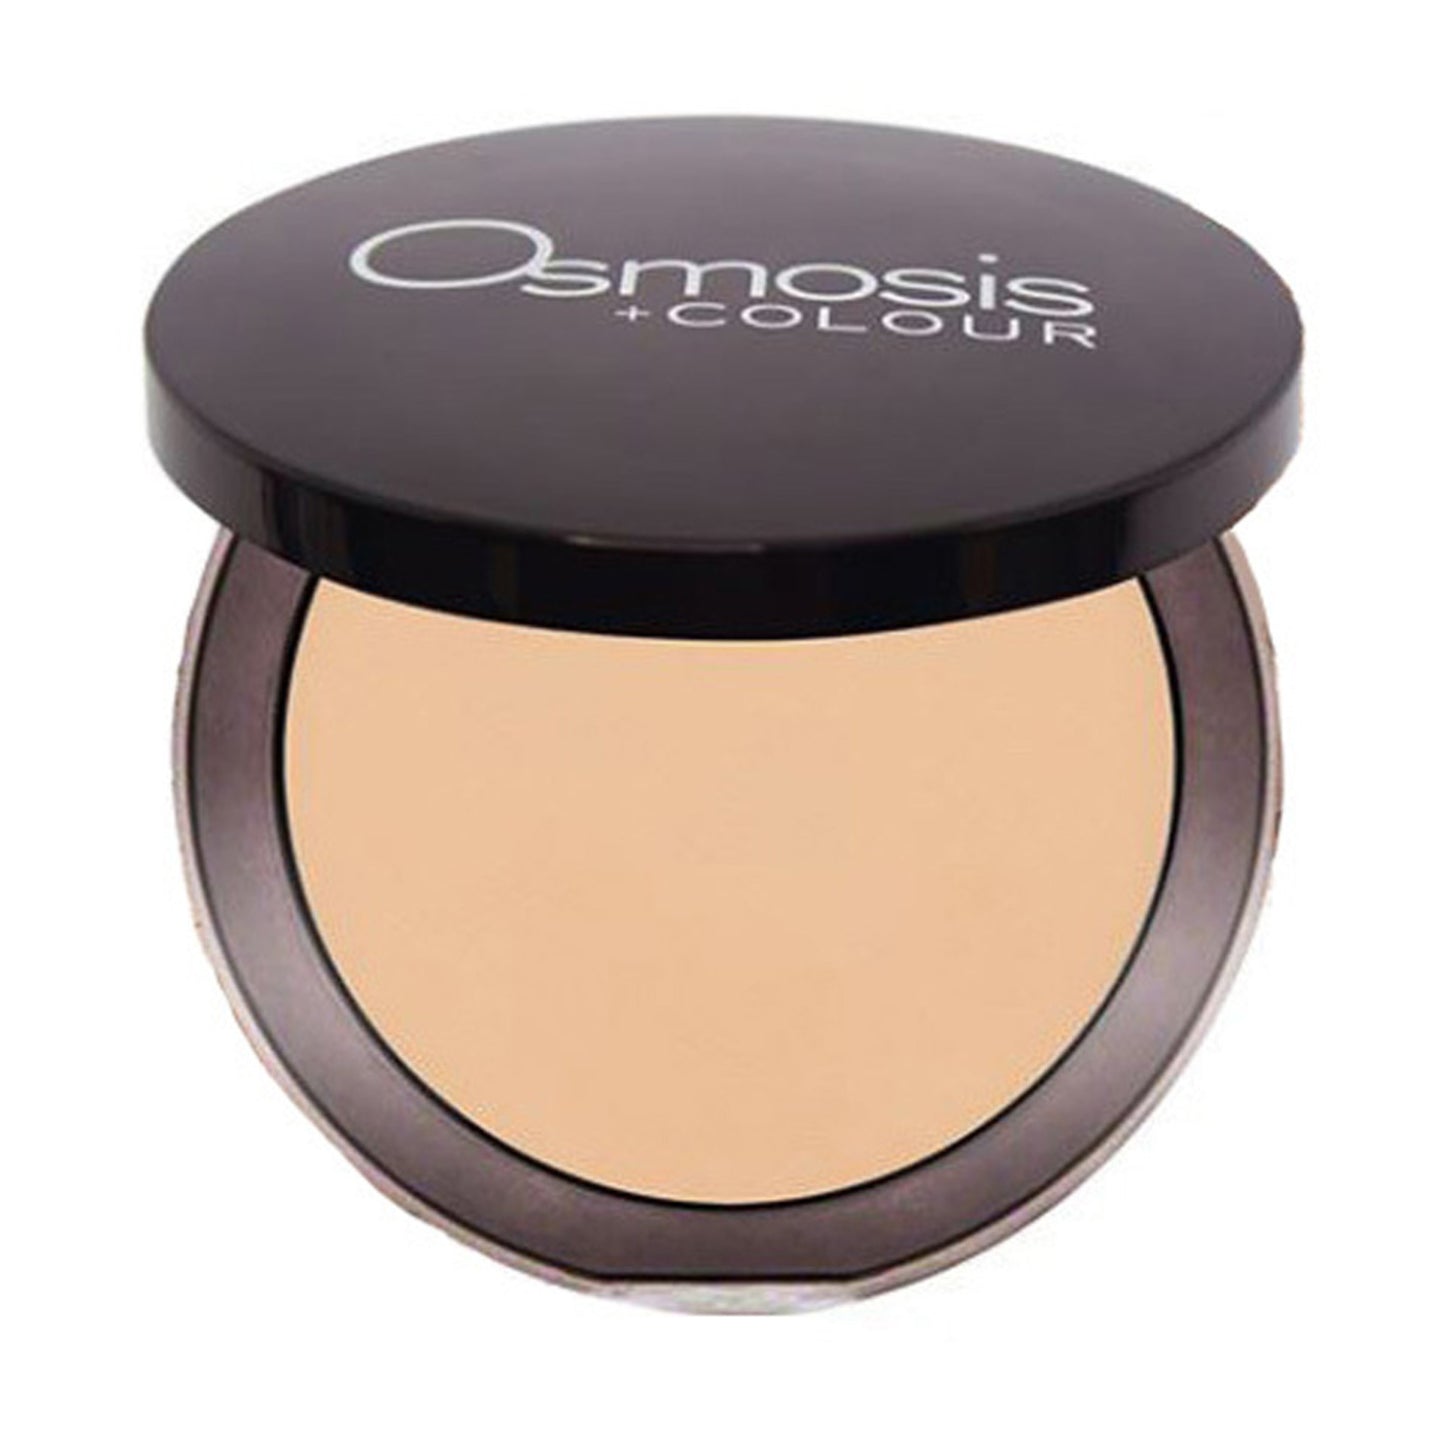 Osmosis Professional Mineral Pressed Base 9.6 g / 0.3 oz